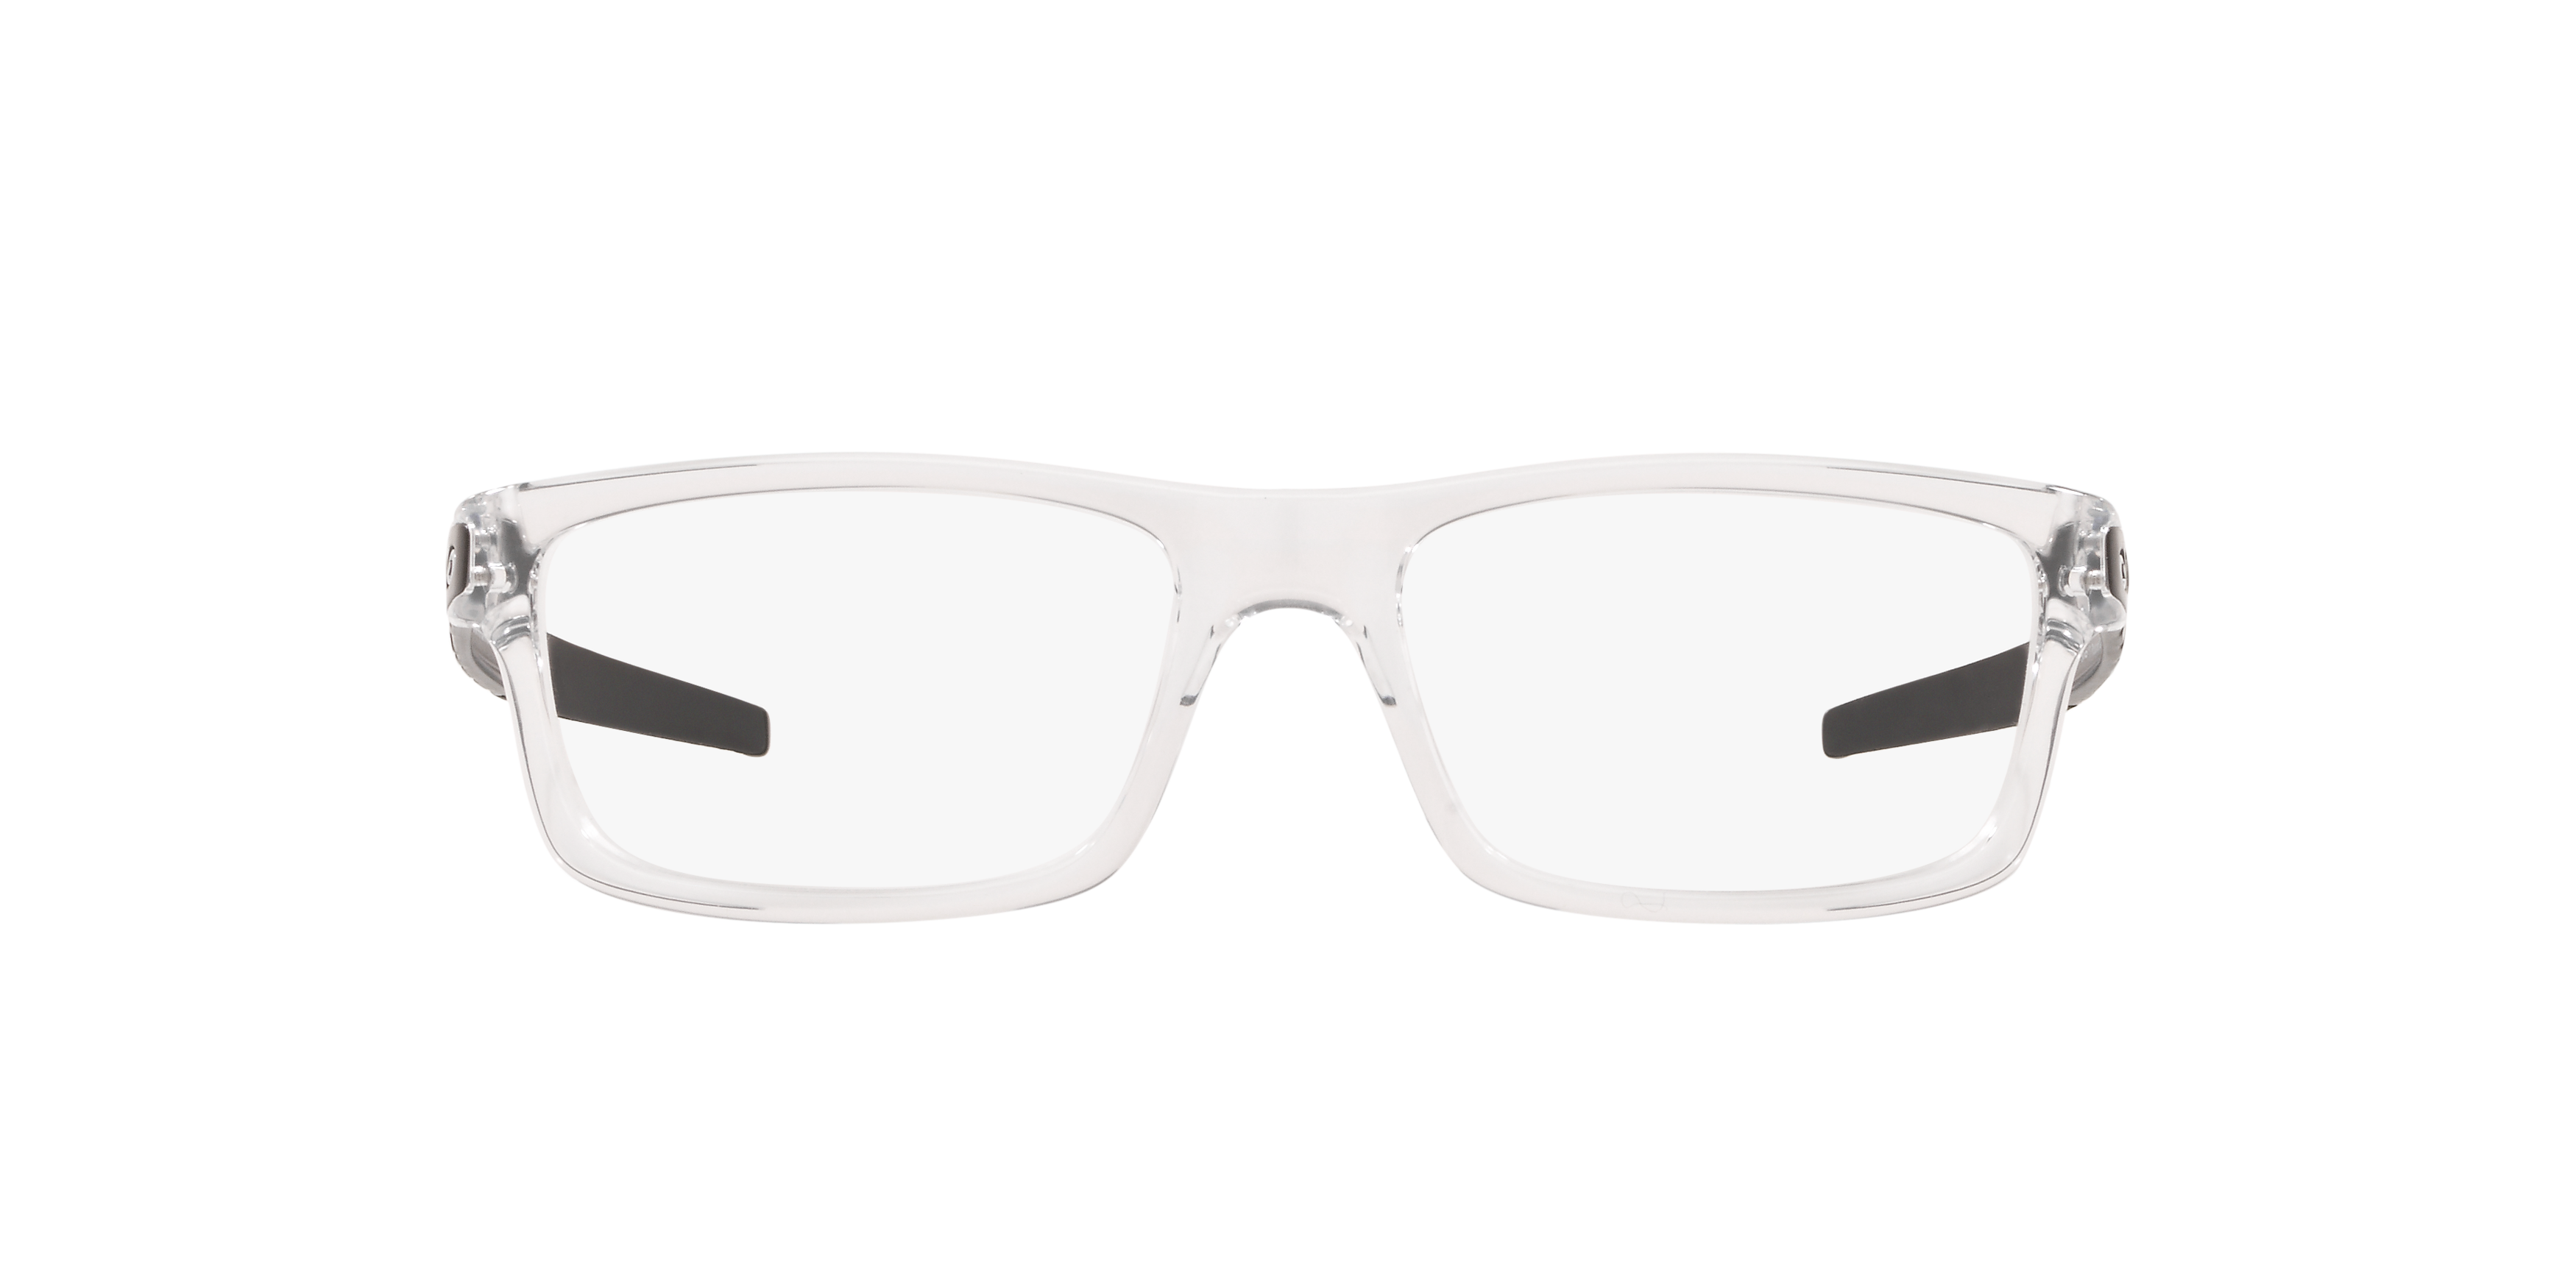 Front Oakley Currency OX 8026 Glasses Transparent / Black